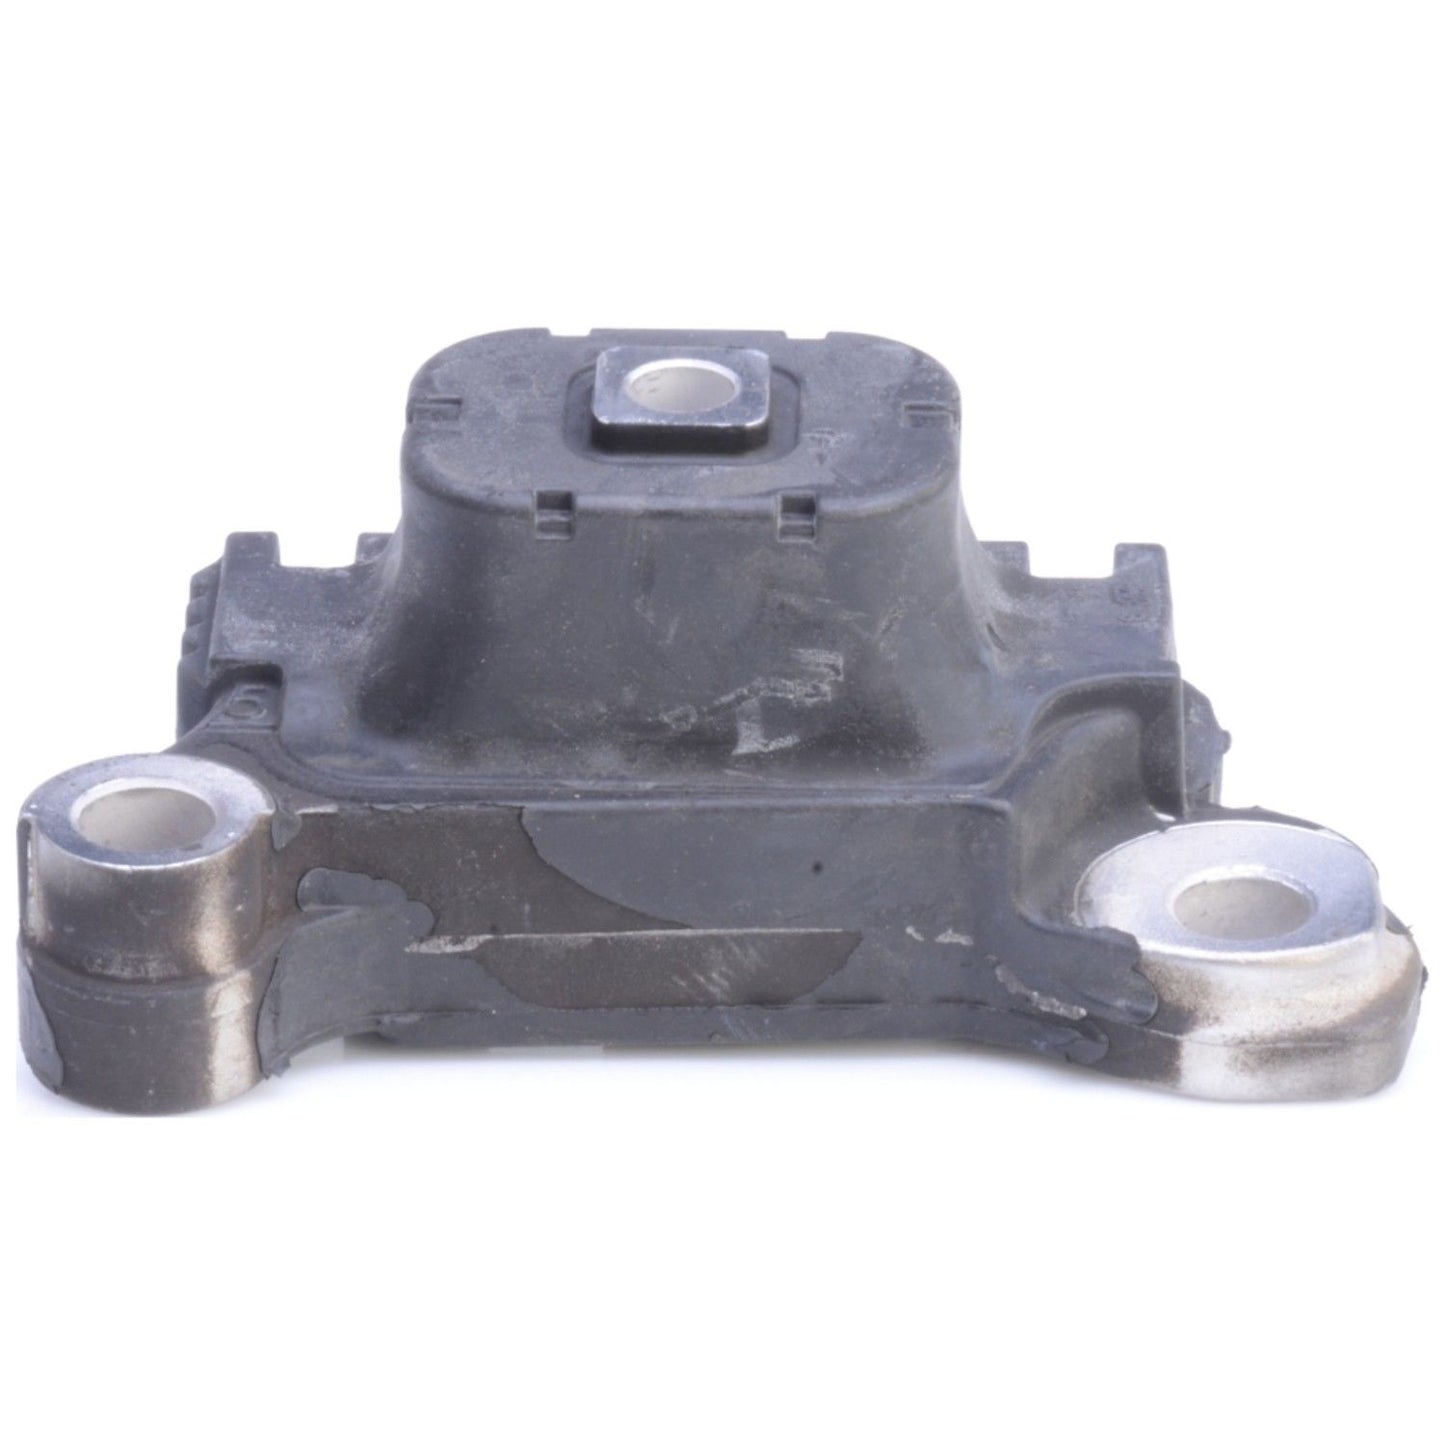 Front View of Left Automatic Transmission Mount ANCHOR 9860